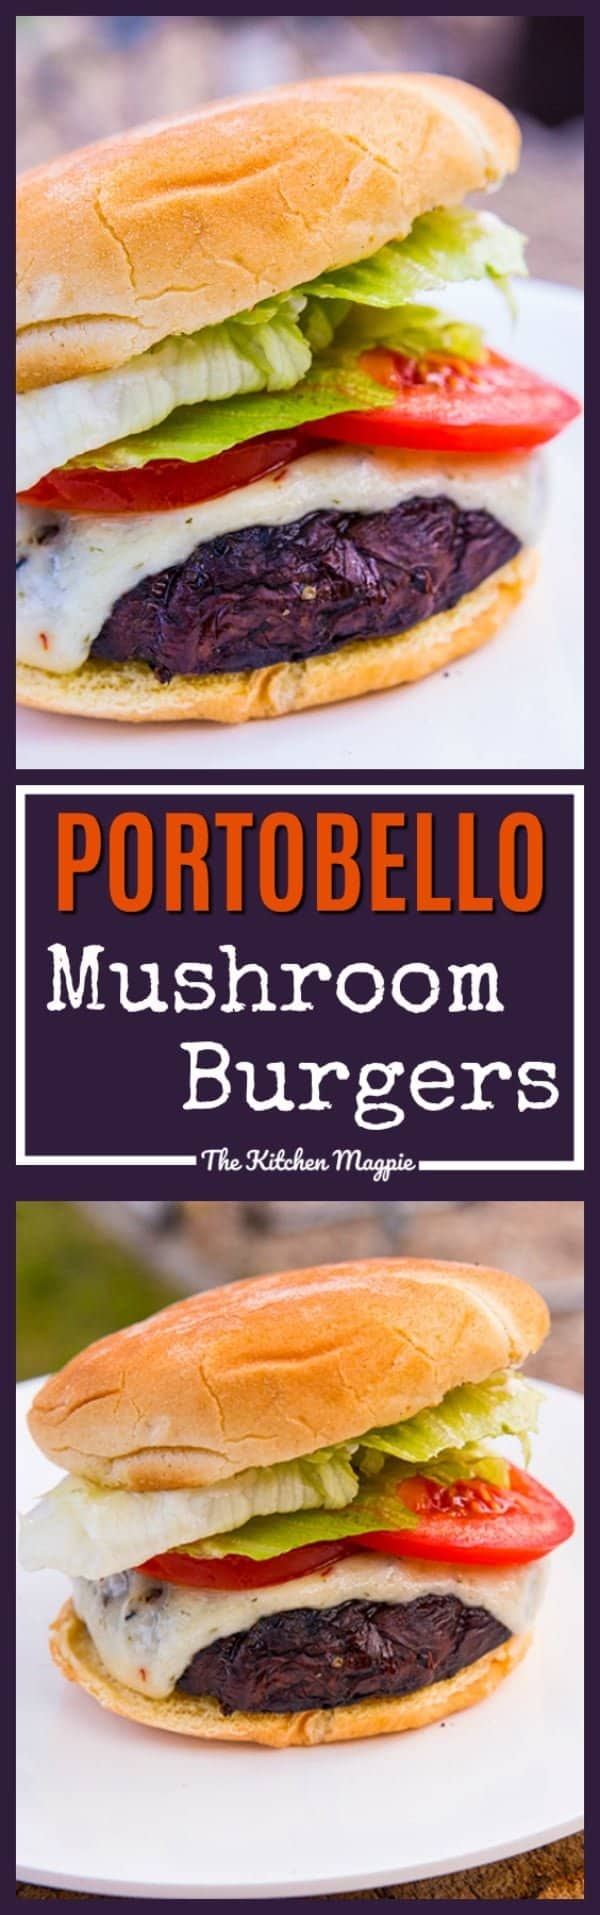 These Homemade Portobello Mushroom Burgers are so much better than any restaurant! The secret is a good marinade - overnight! I can't believe that it's taken me this long to make homemade portobello mushroom burgers - I LOVE mushrooms